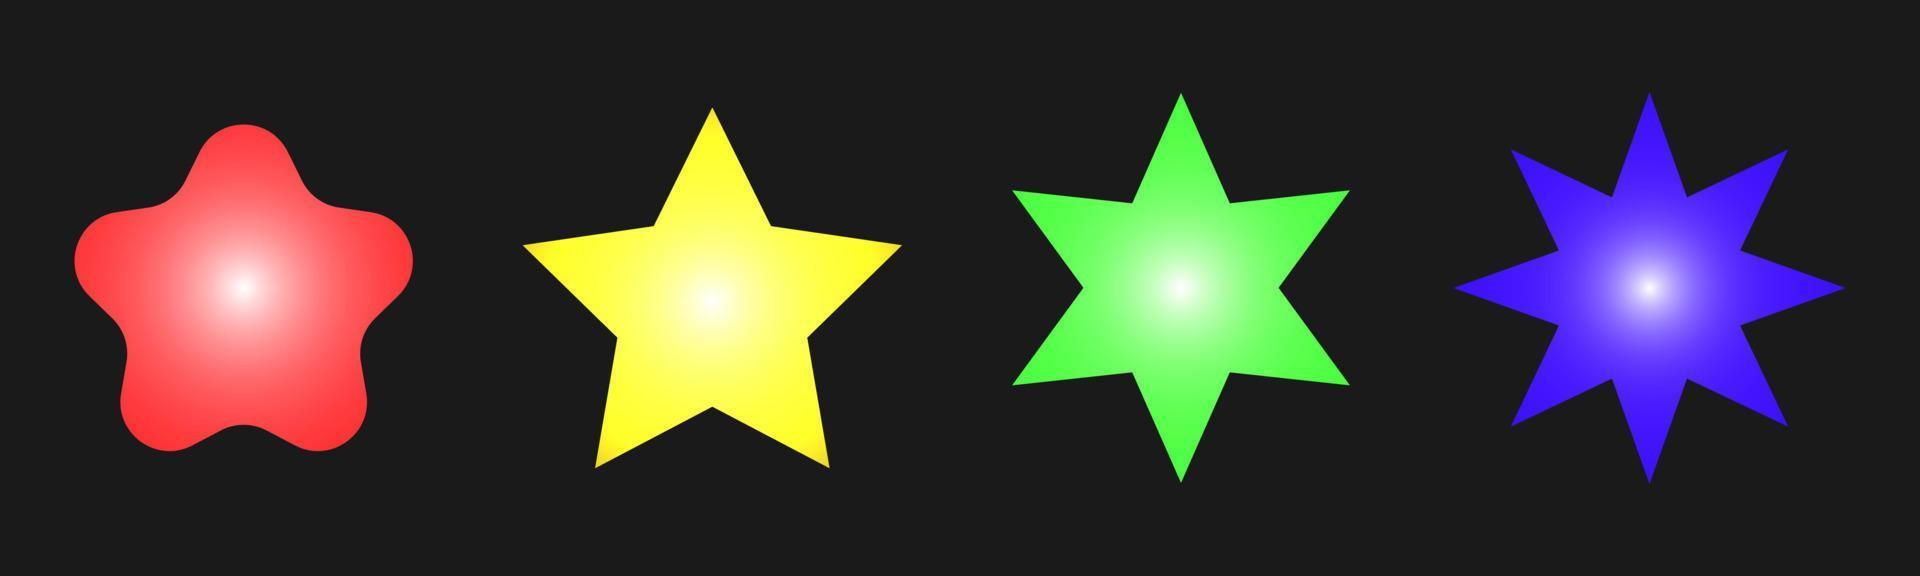 set of star shapes in bright colors, ideal for design elements, such as celebrations, events, christmas, birthdays, new years, etc. vector